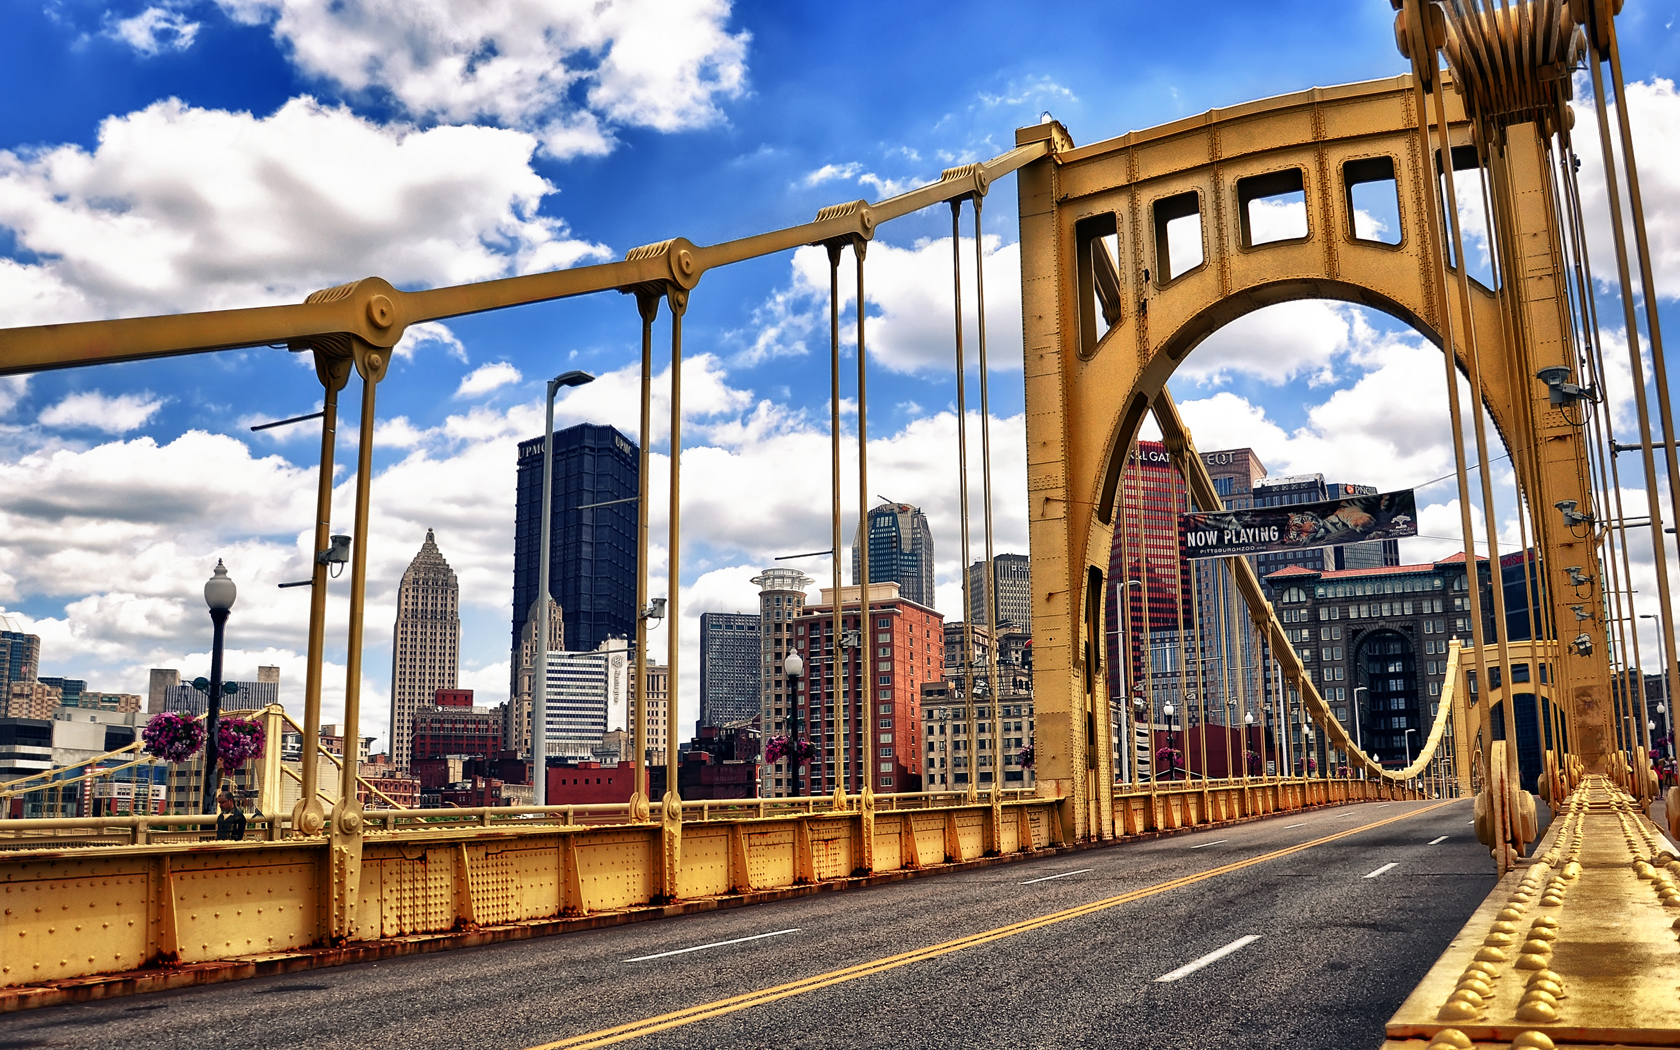 Download Wallpapers   Pittsburgh PA 1680x1050